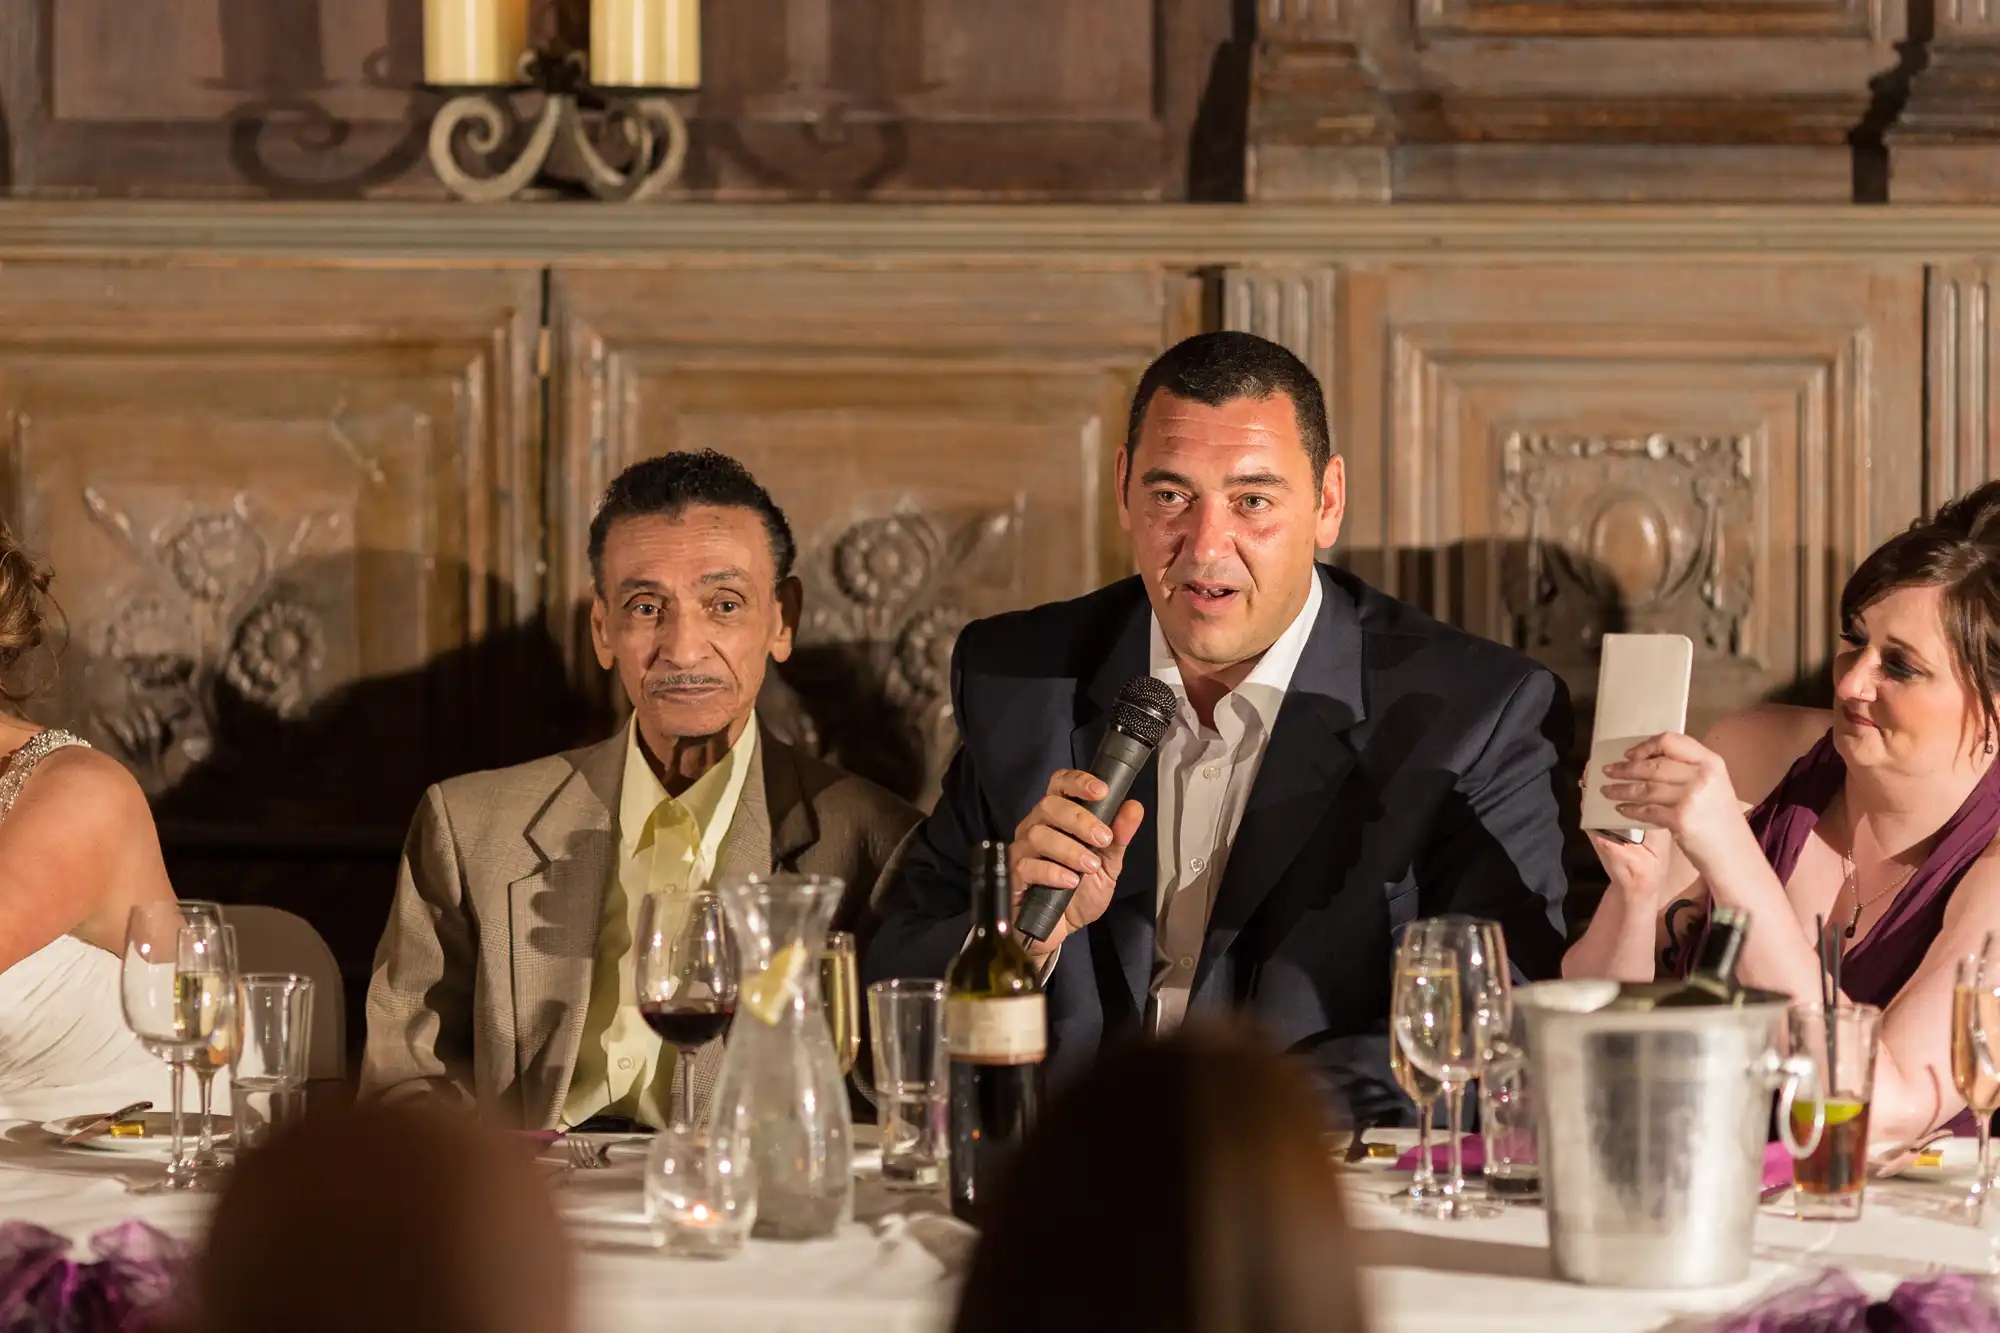 A man in a suit speaks into a microphone at a formal dinner table while others listen, with wine glasses and candles on the table.